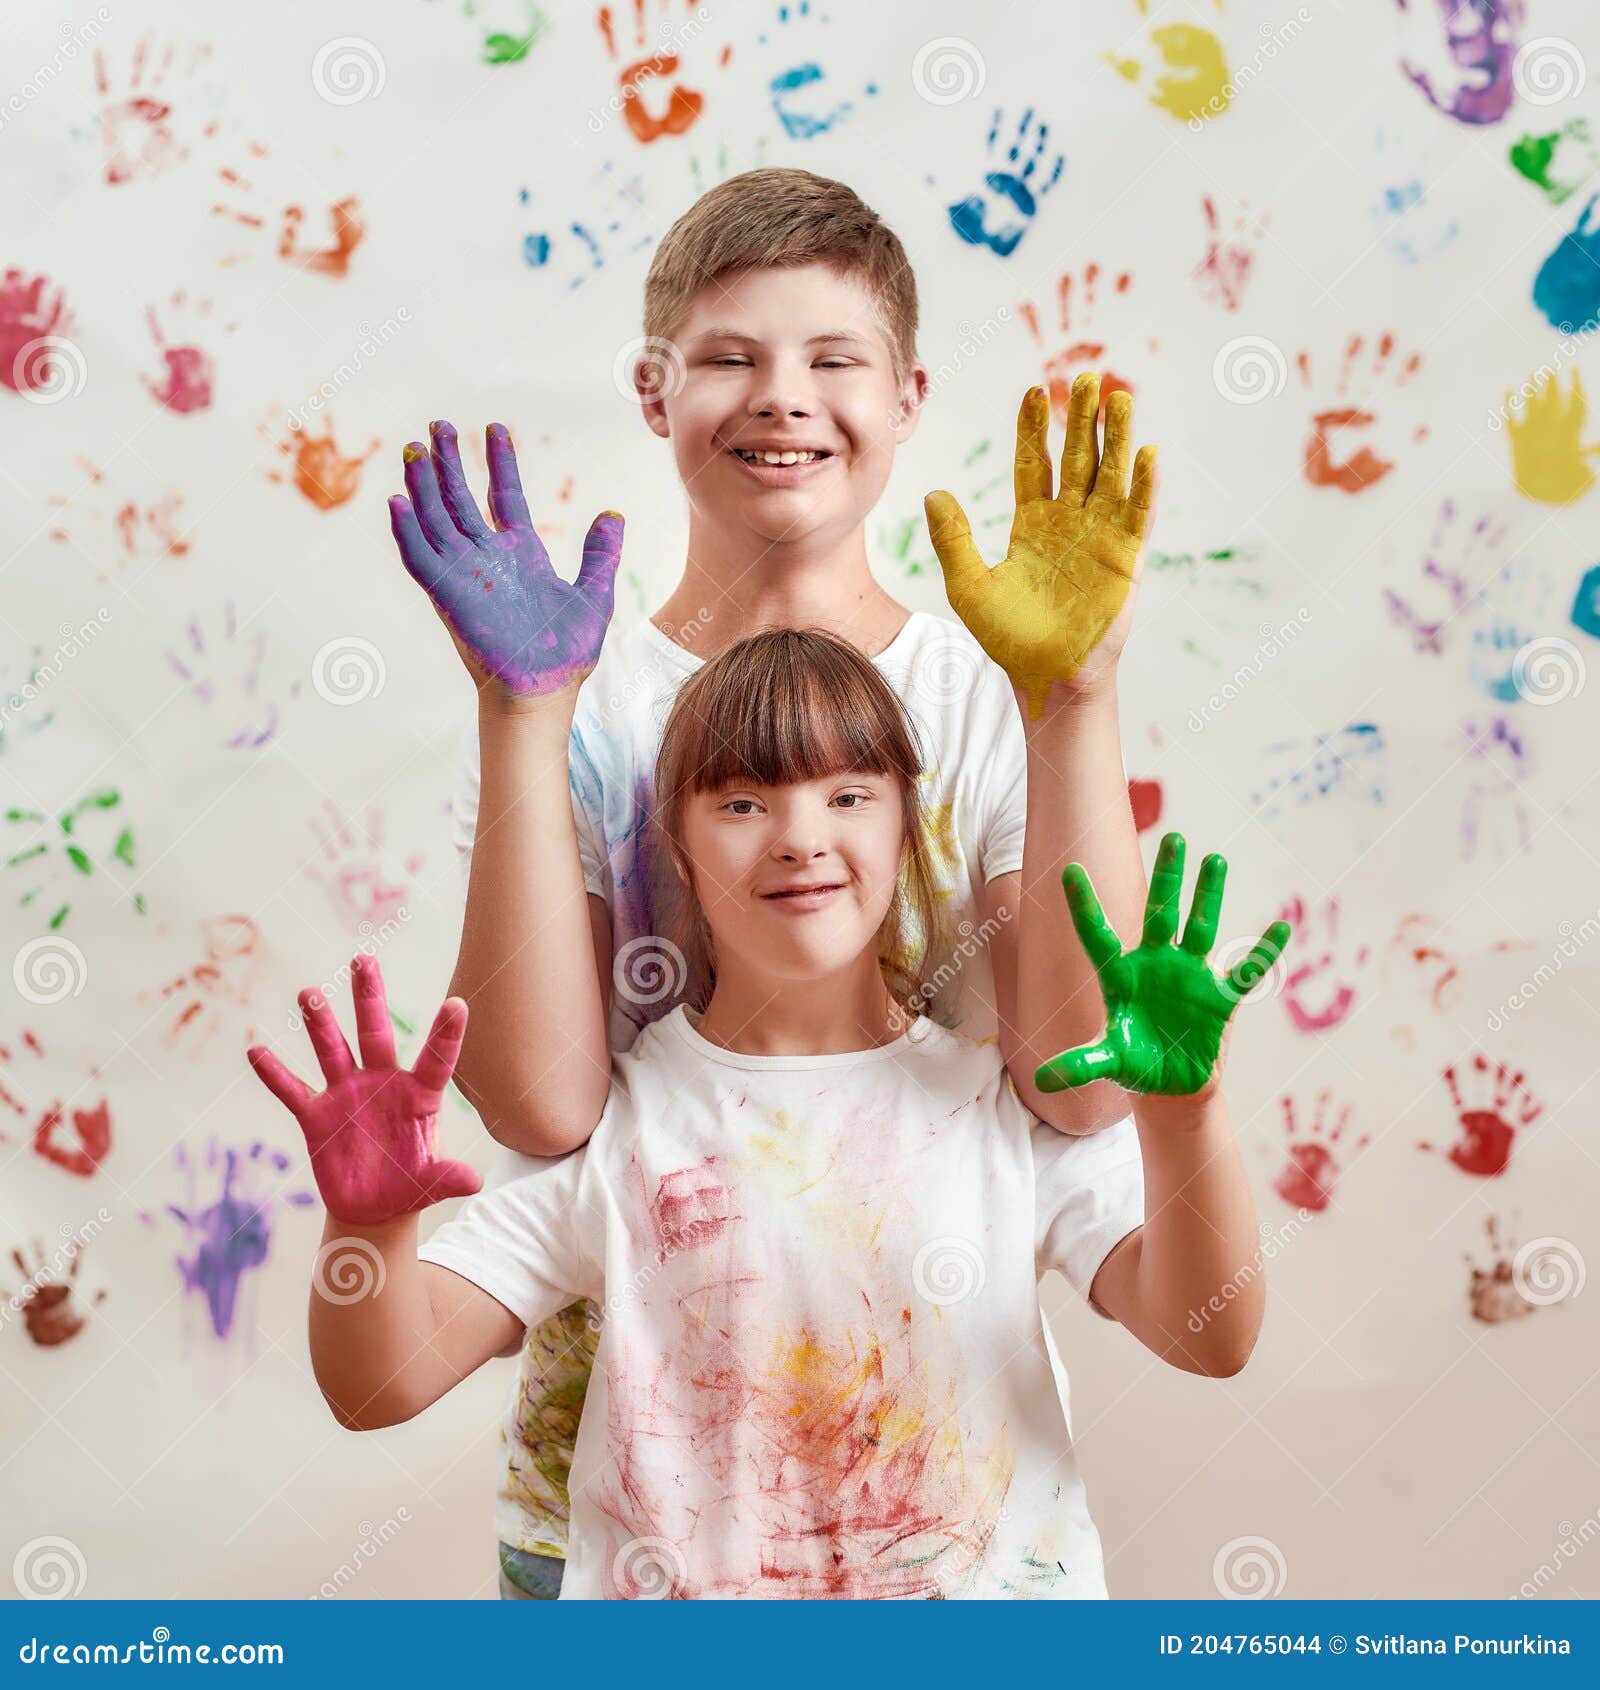 happy kids, disabled boy and girl with down syndrome smiling at camera, showing their hands painted in colorful paints